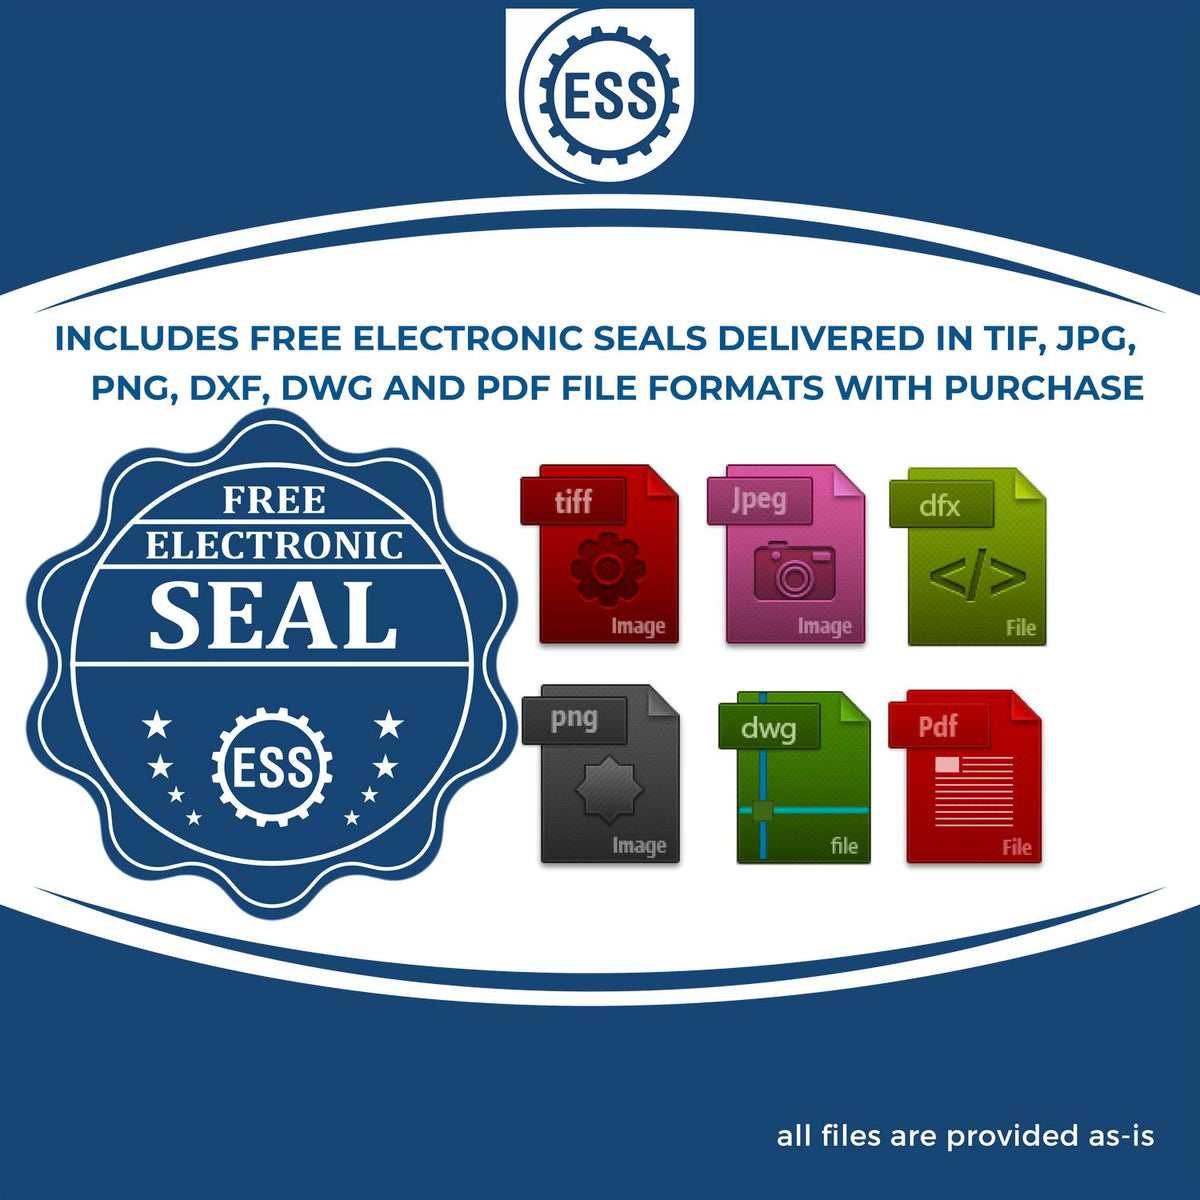 An infographic for the free electronic seal for the State of Alabama Extended Long Reach Engineer Seal illustrating the different file type icons such as DXF, DWG, TIF, JPG and PNG.